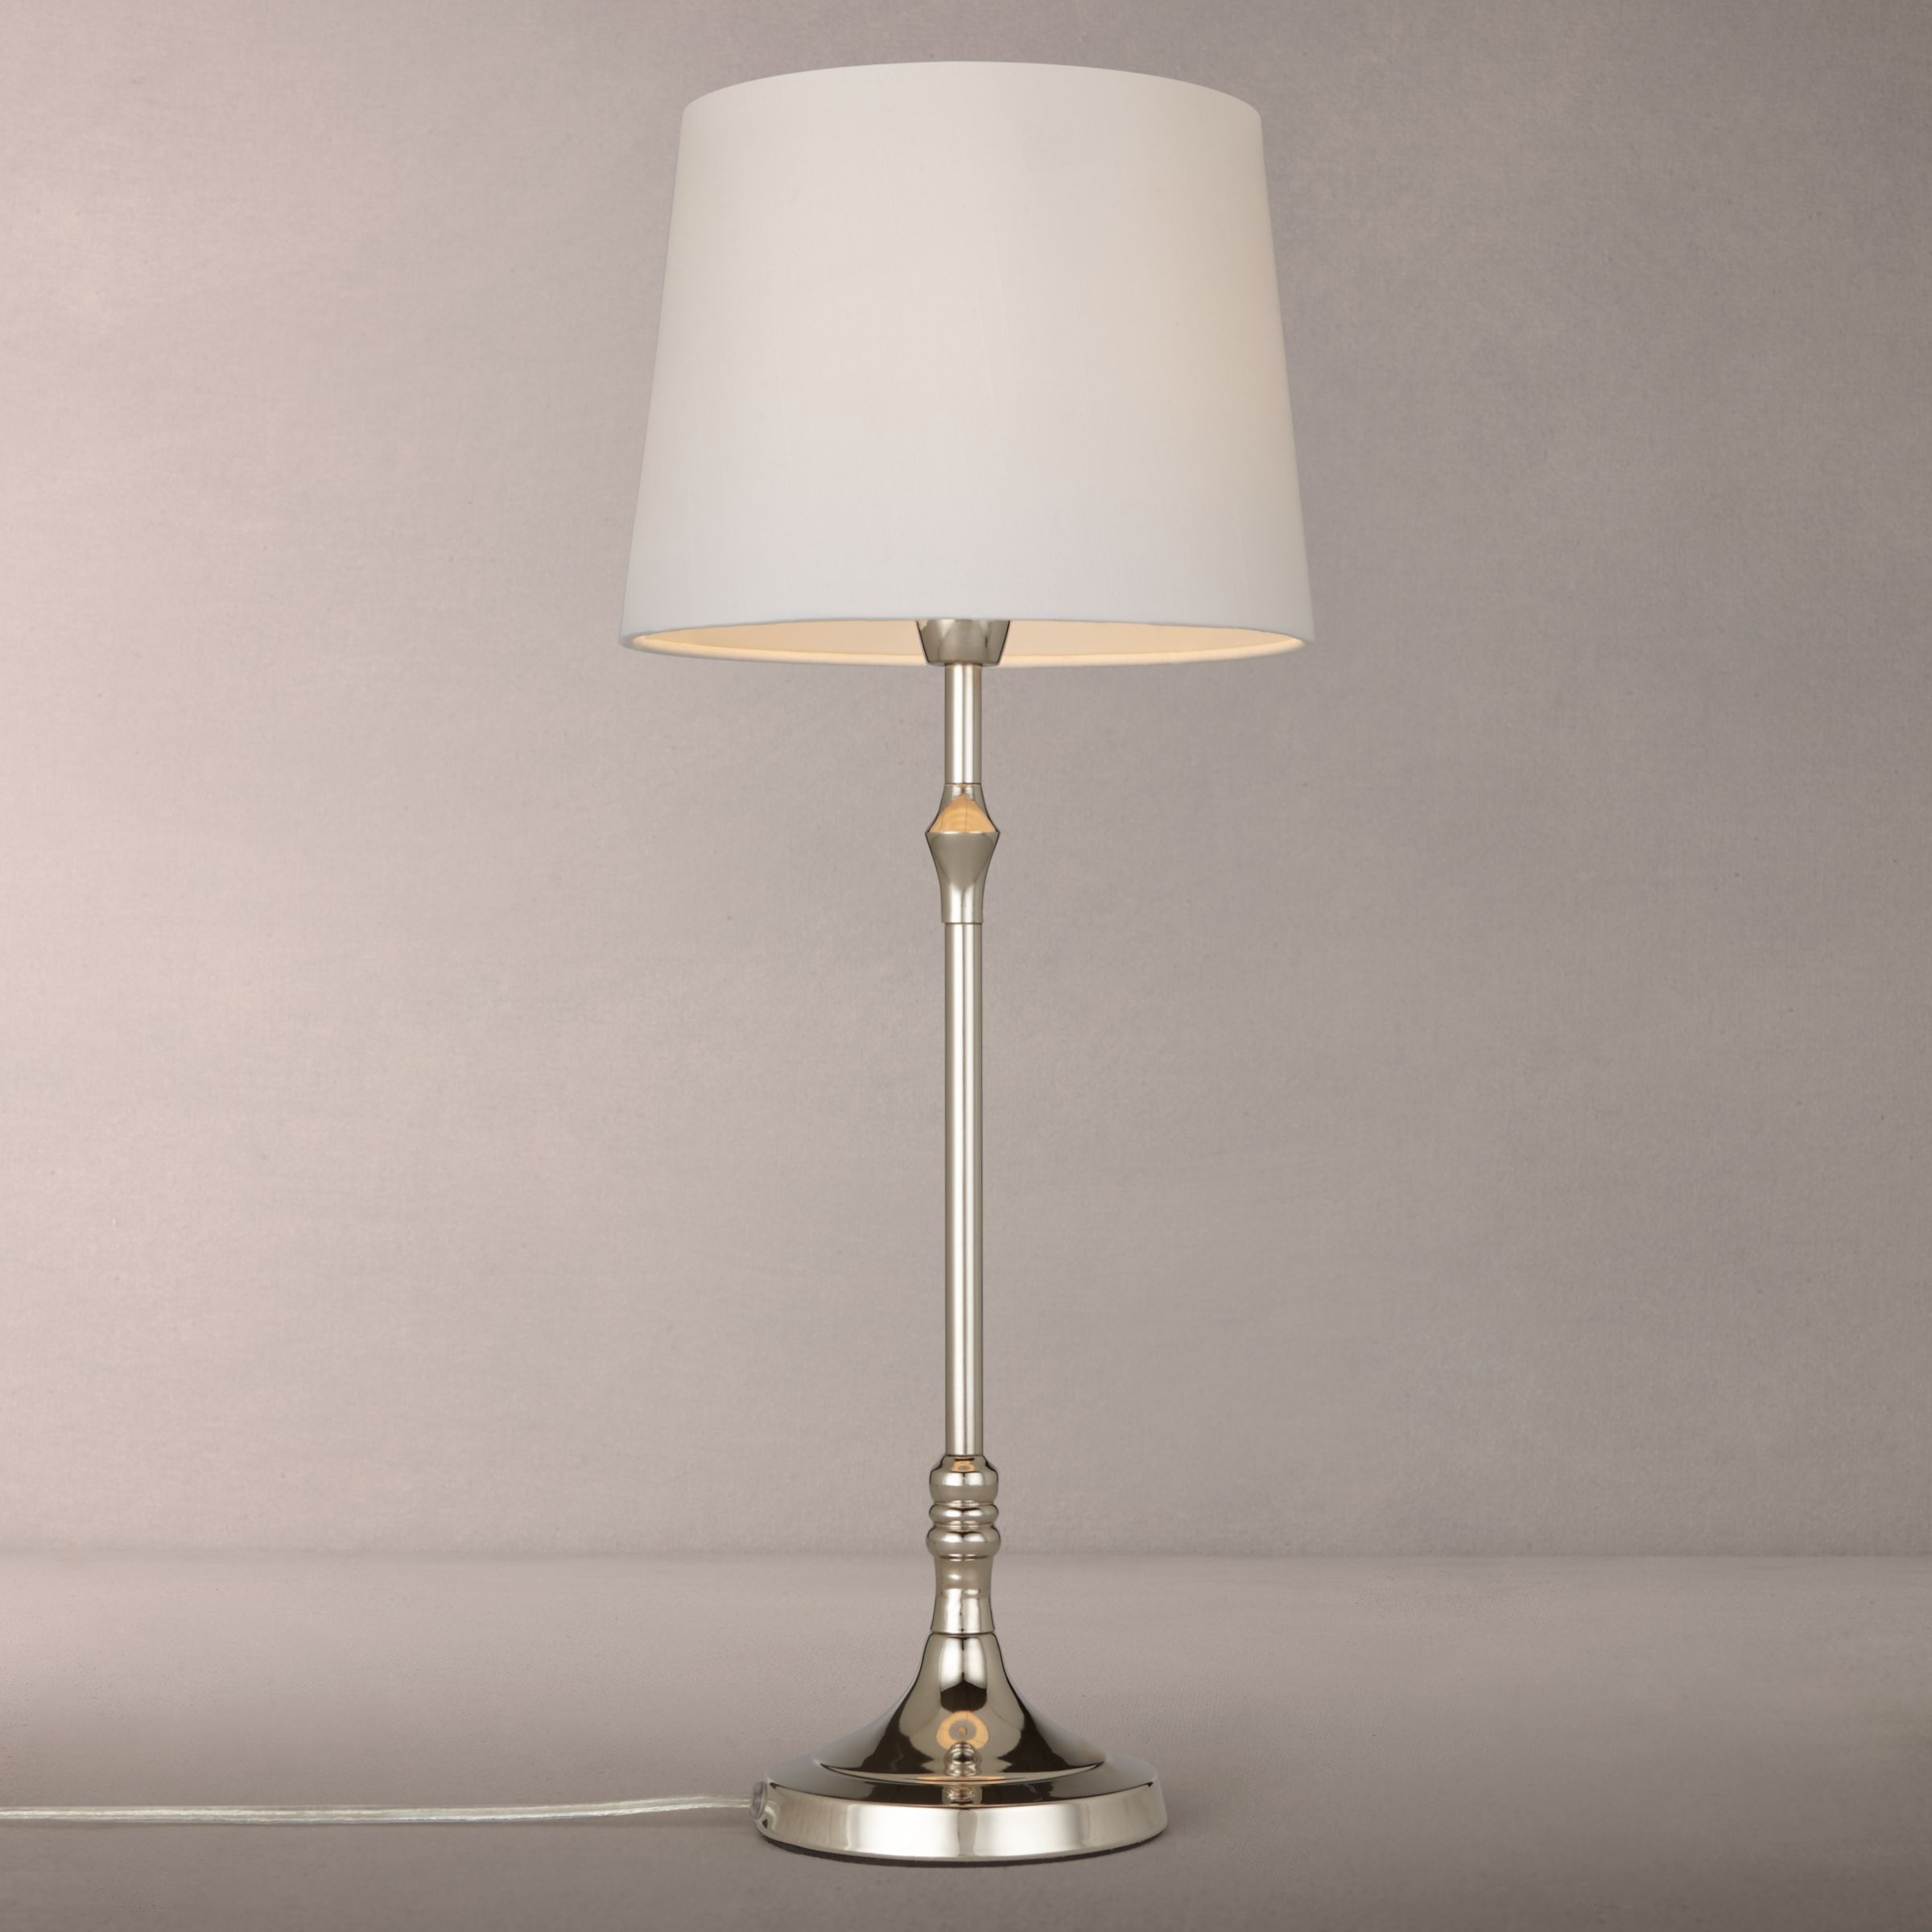 John Lewis & Partners Cleo Turned Candlestick Table Lamp